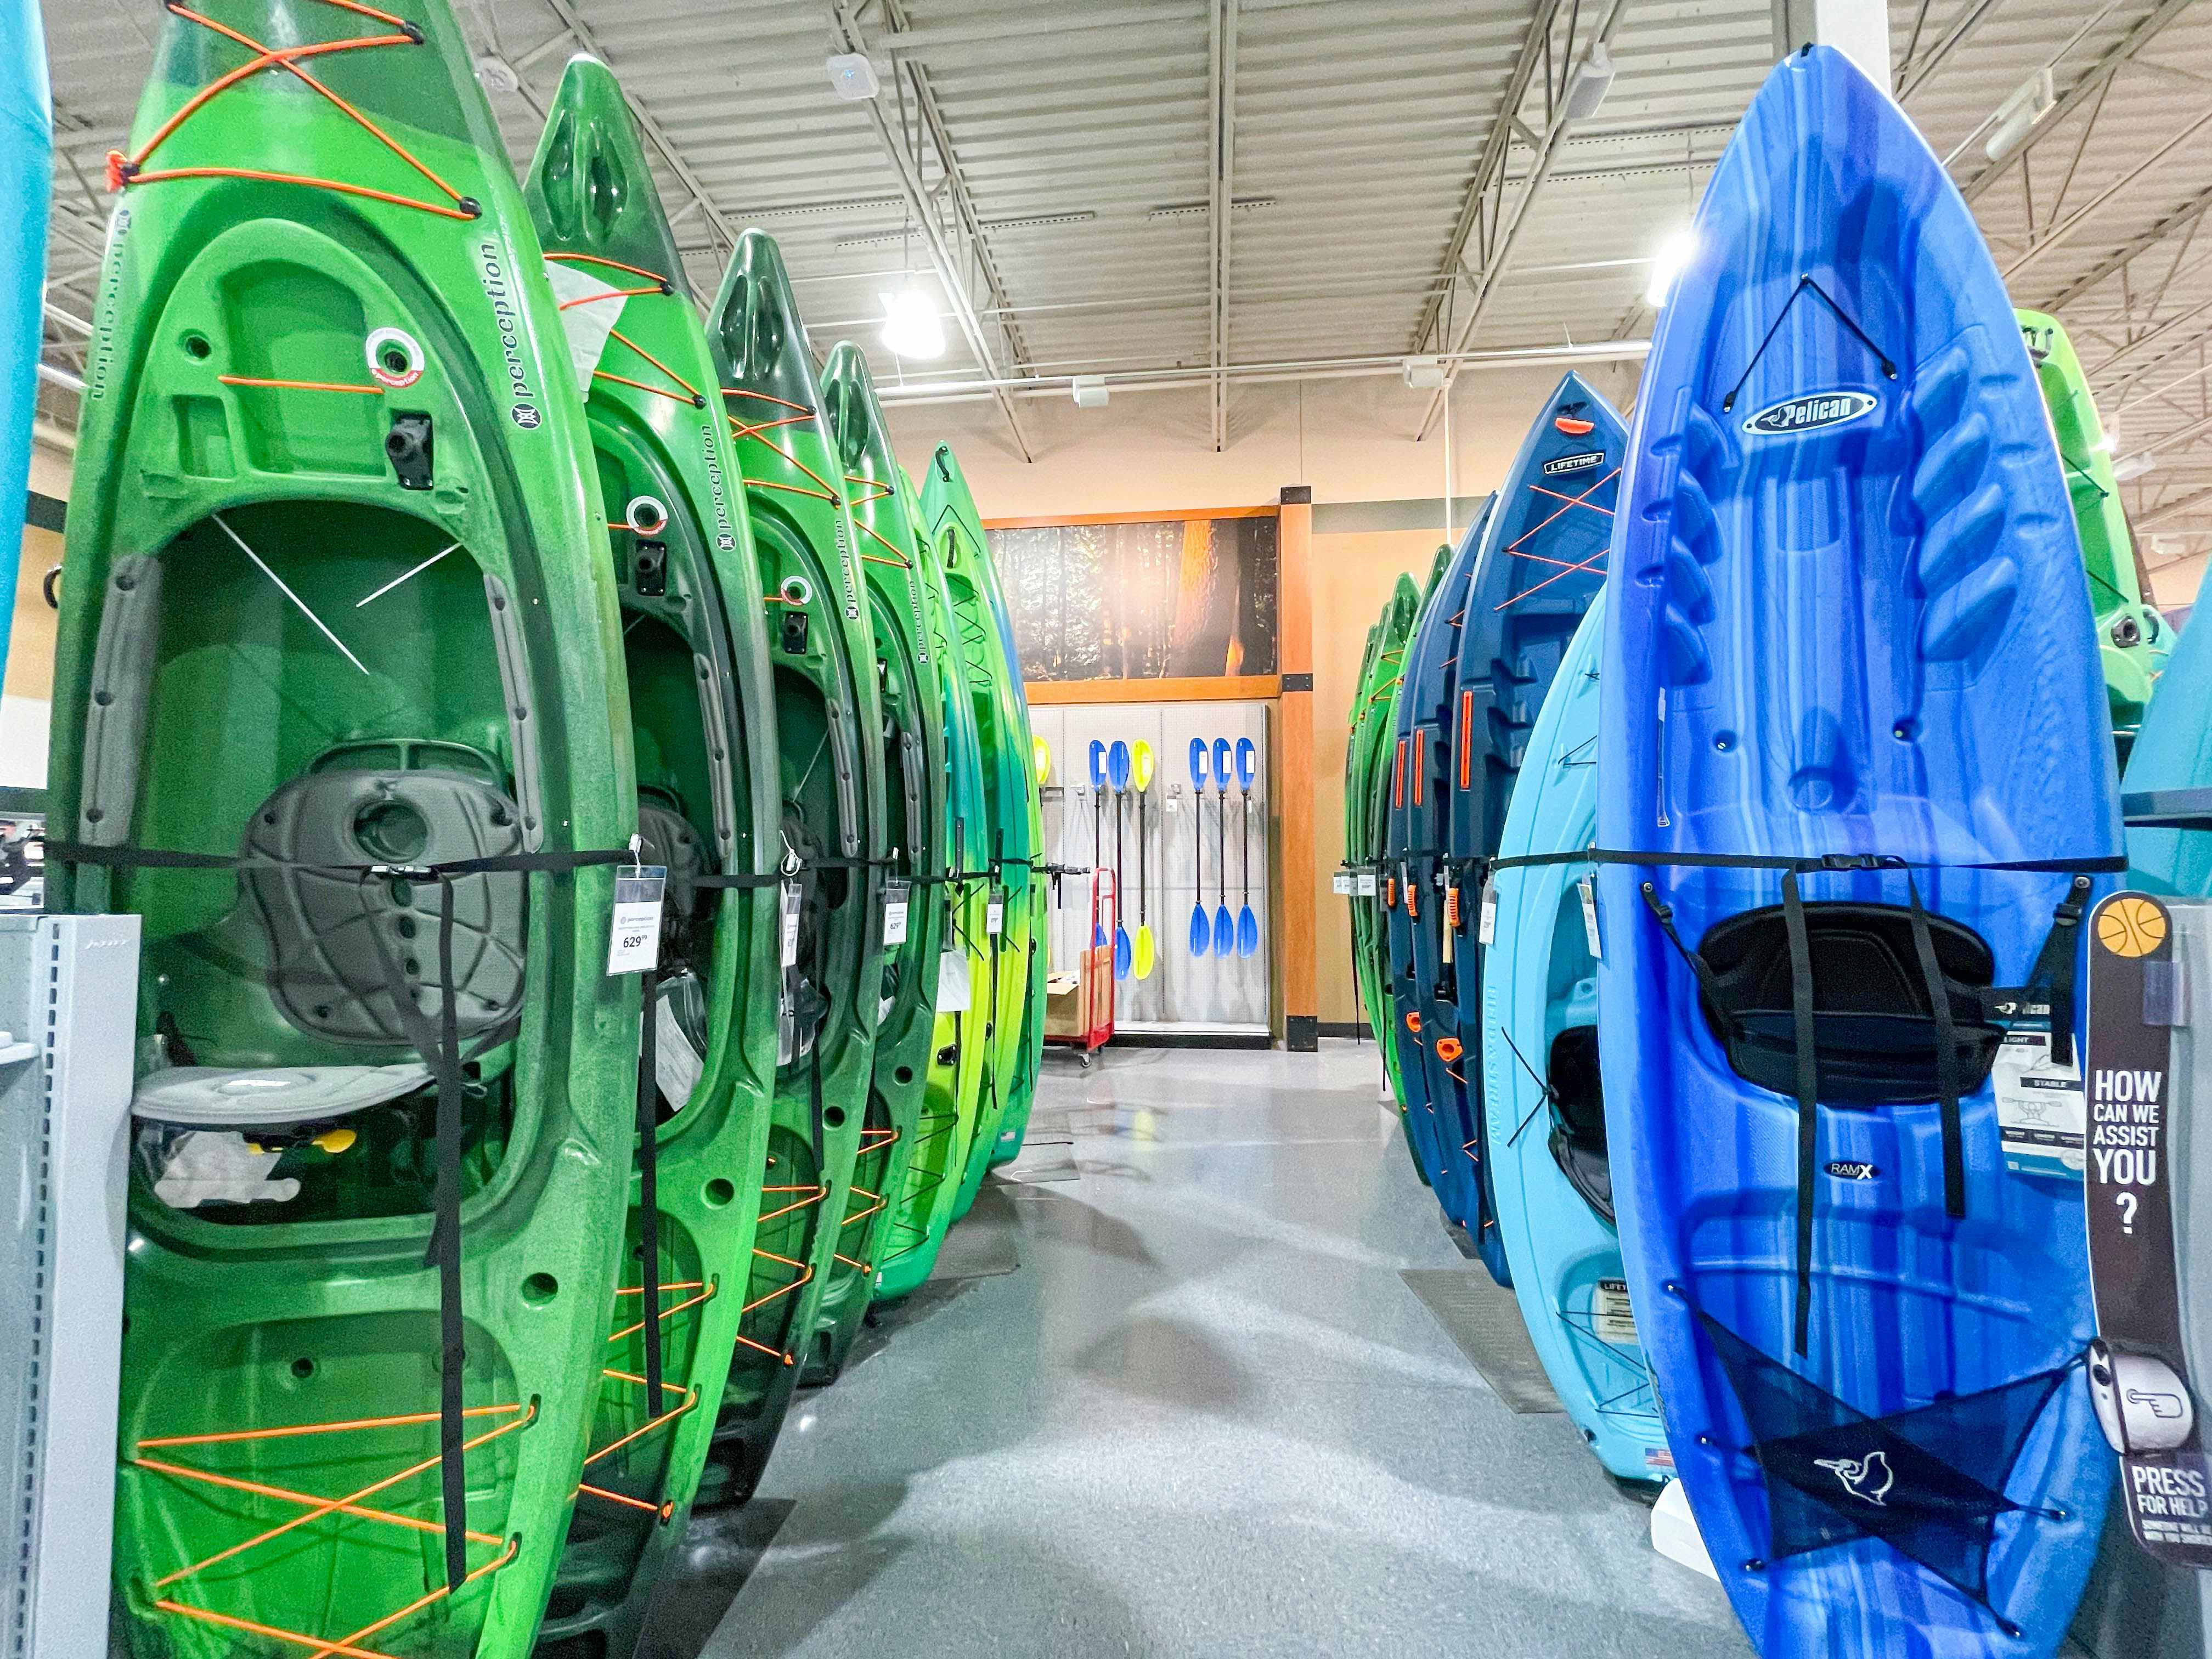 Blue and green Kayaks in rows, for sale at Dicks Sporting Goods.